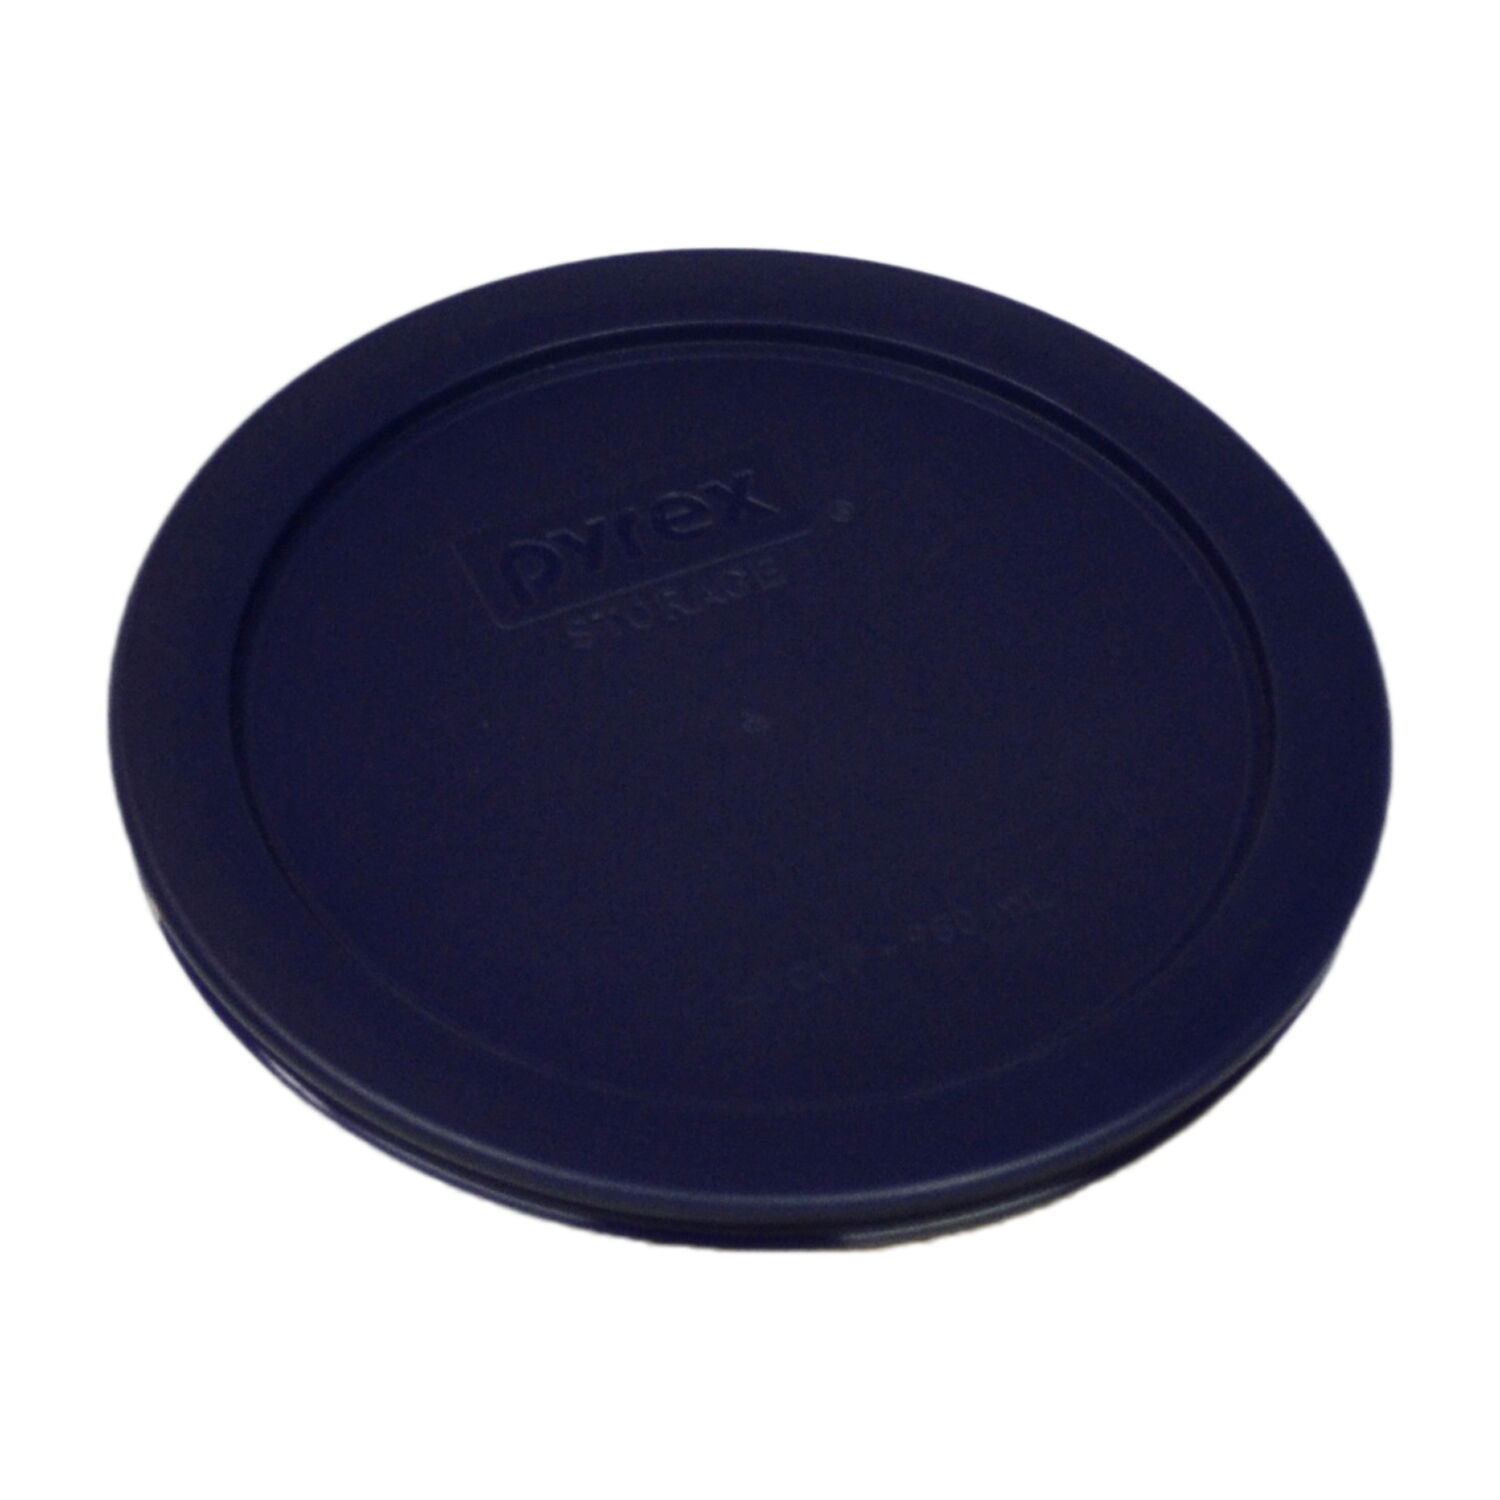 Pyrex 7201-PC Round 4 Cup Blue Food Storage Lid Cover for 7201 Dish (4 Pack) Pyrex 7201PC - фотография #5